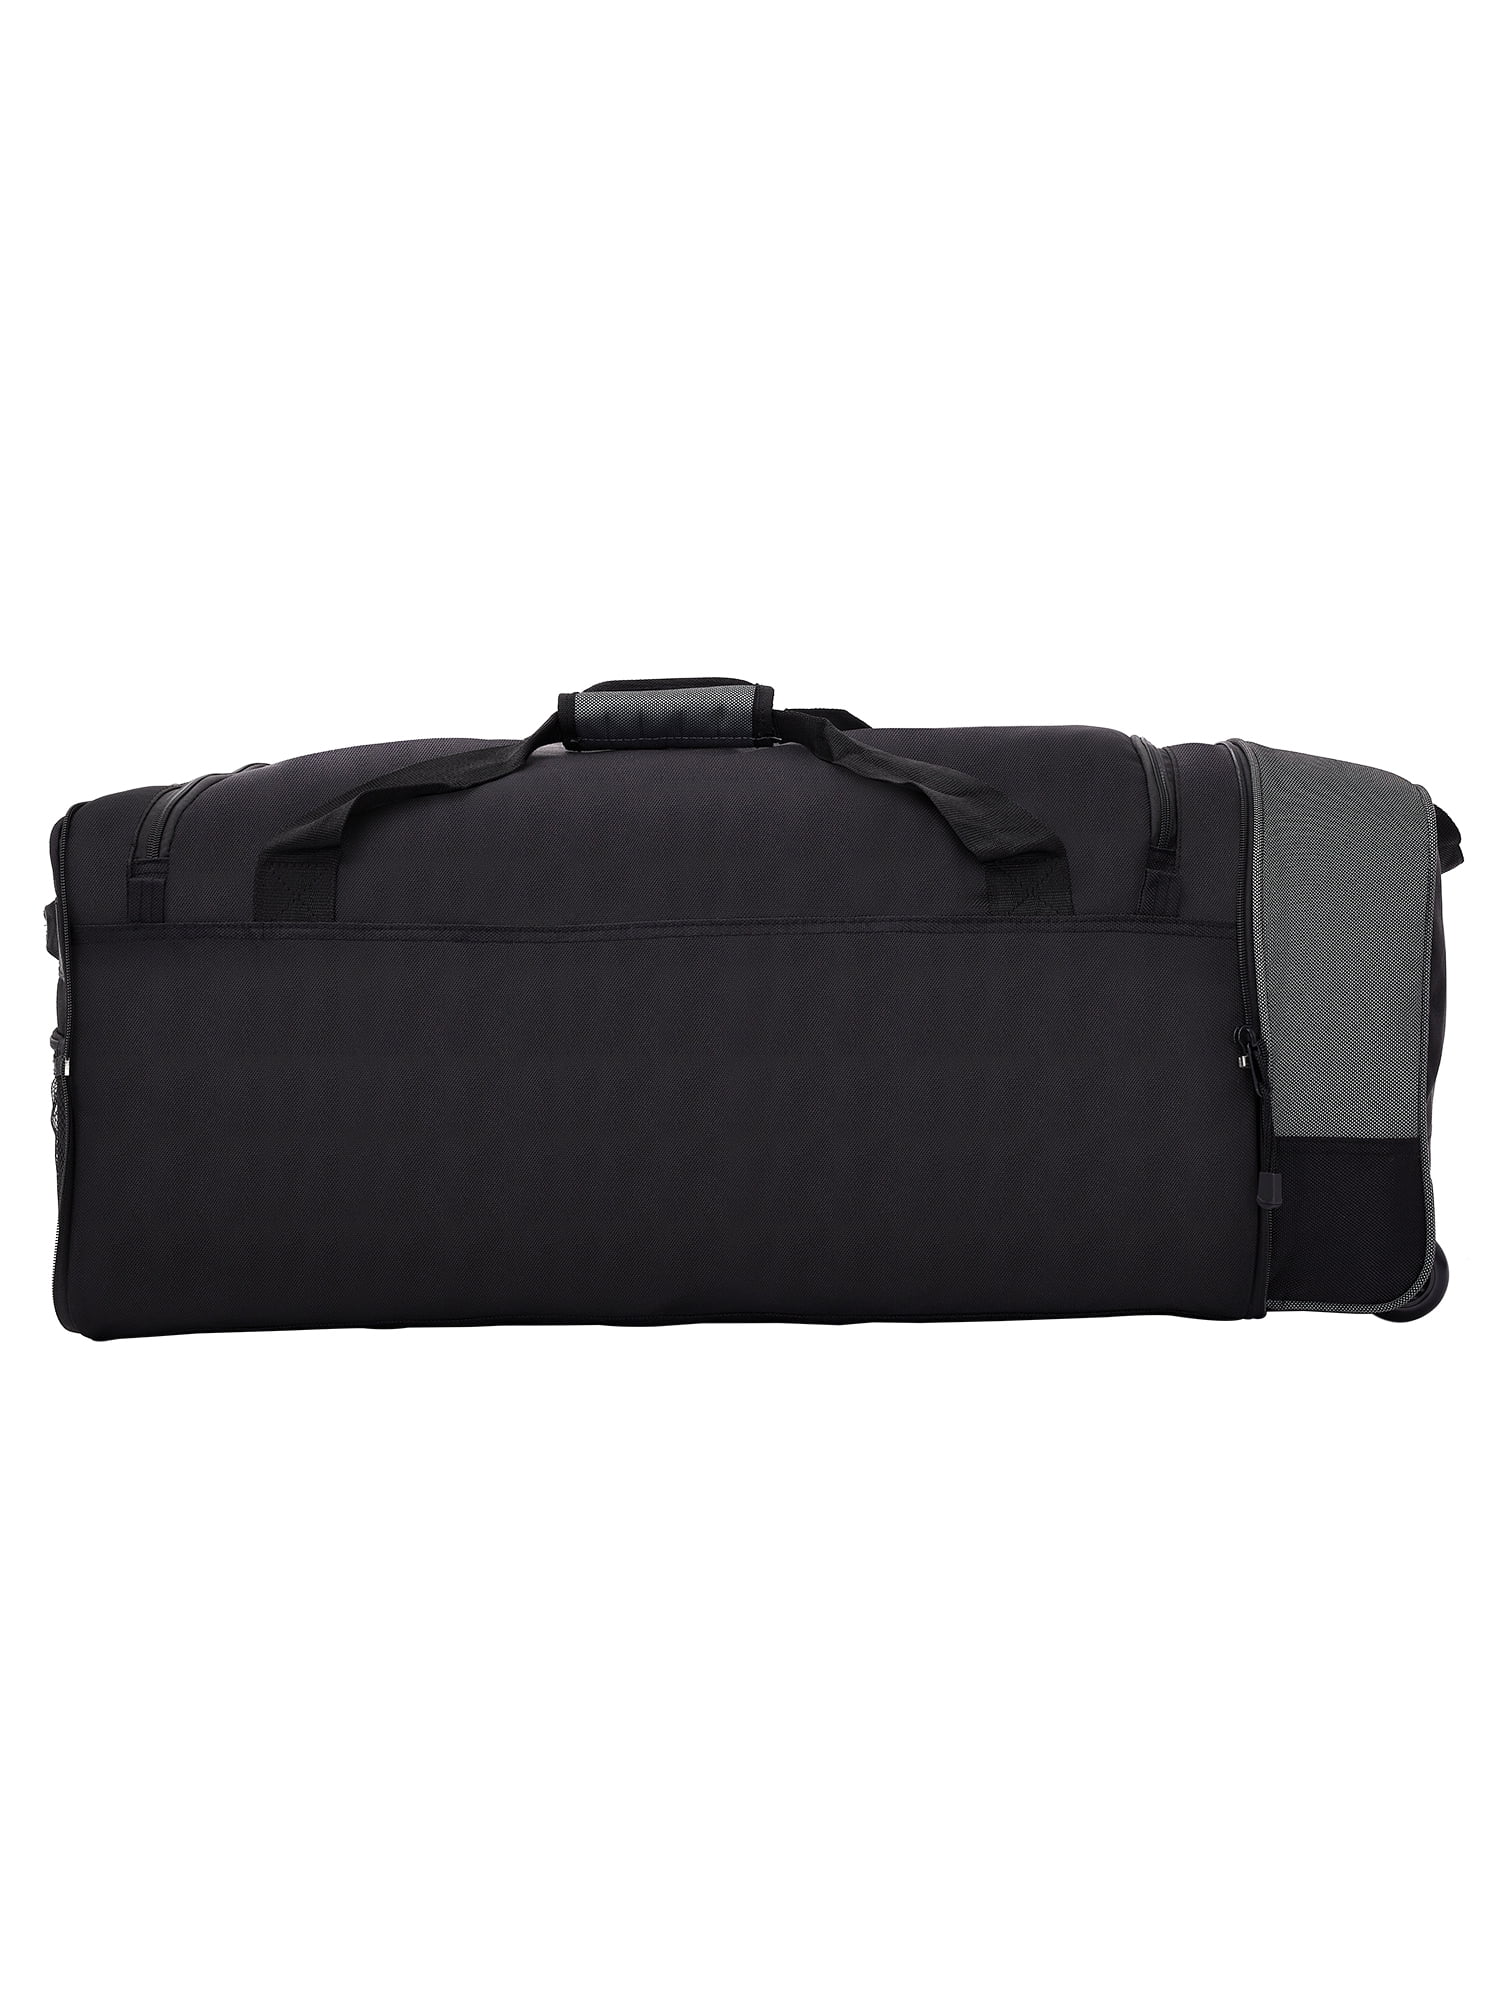 Travelers Club 32-inch Collapsible Expandble Travel Rolling Duffel Bag